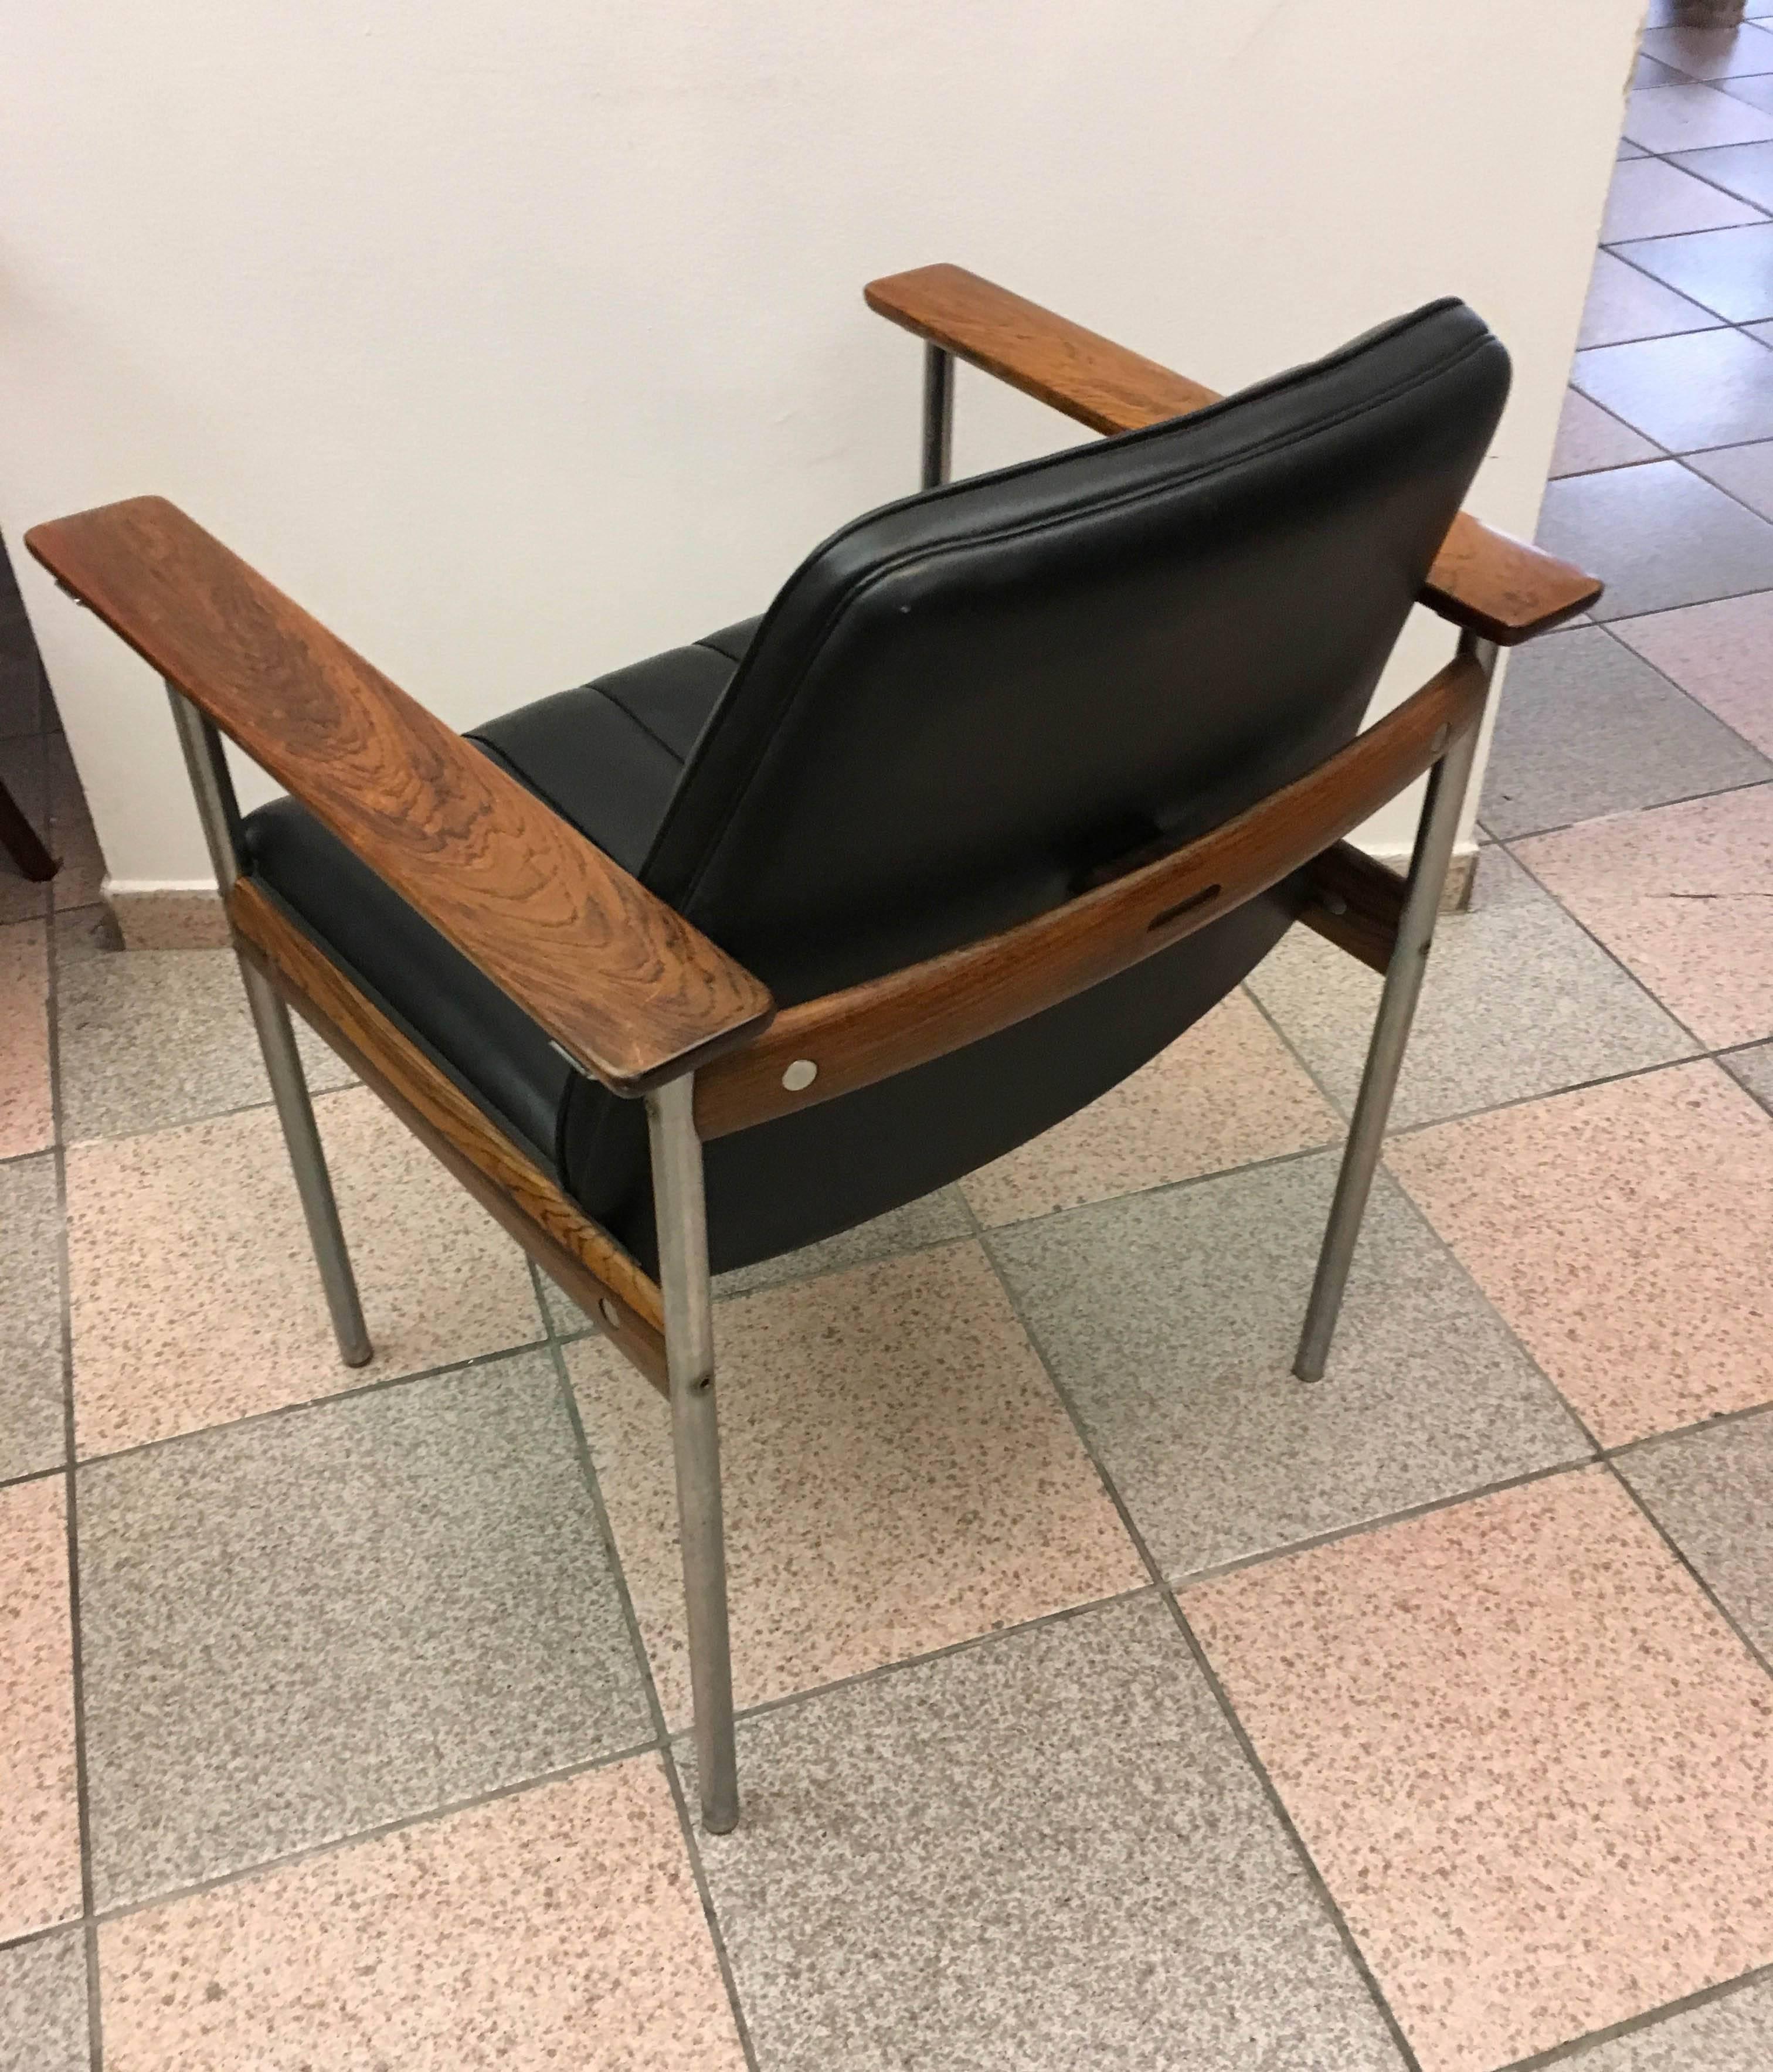 Steel legs with hardwood elements and leather seat designed by Sven Ivar Dysthe in Norway for Dokka Mobler in the 1960s.
Those chairs are in very good originals condition with small patina on steel and wood parts.
Dimensions: 81 H x 65 W x 58 D